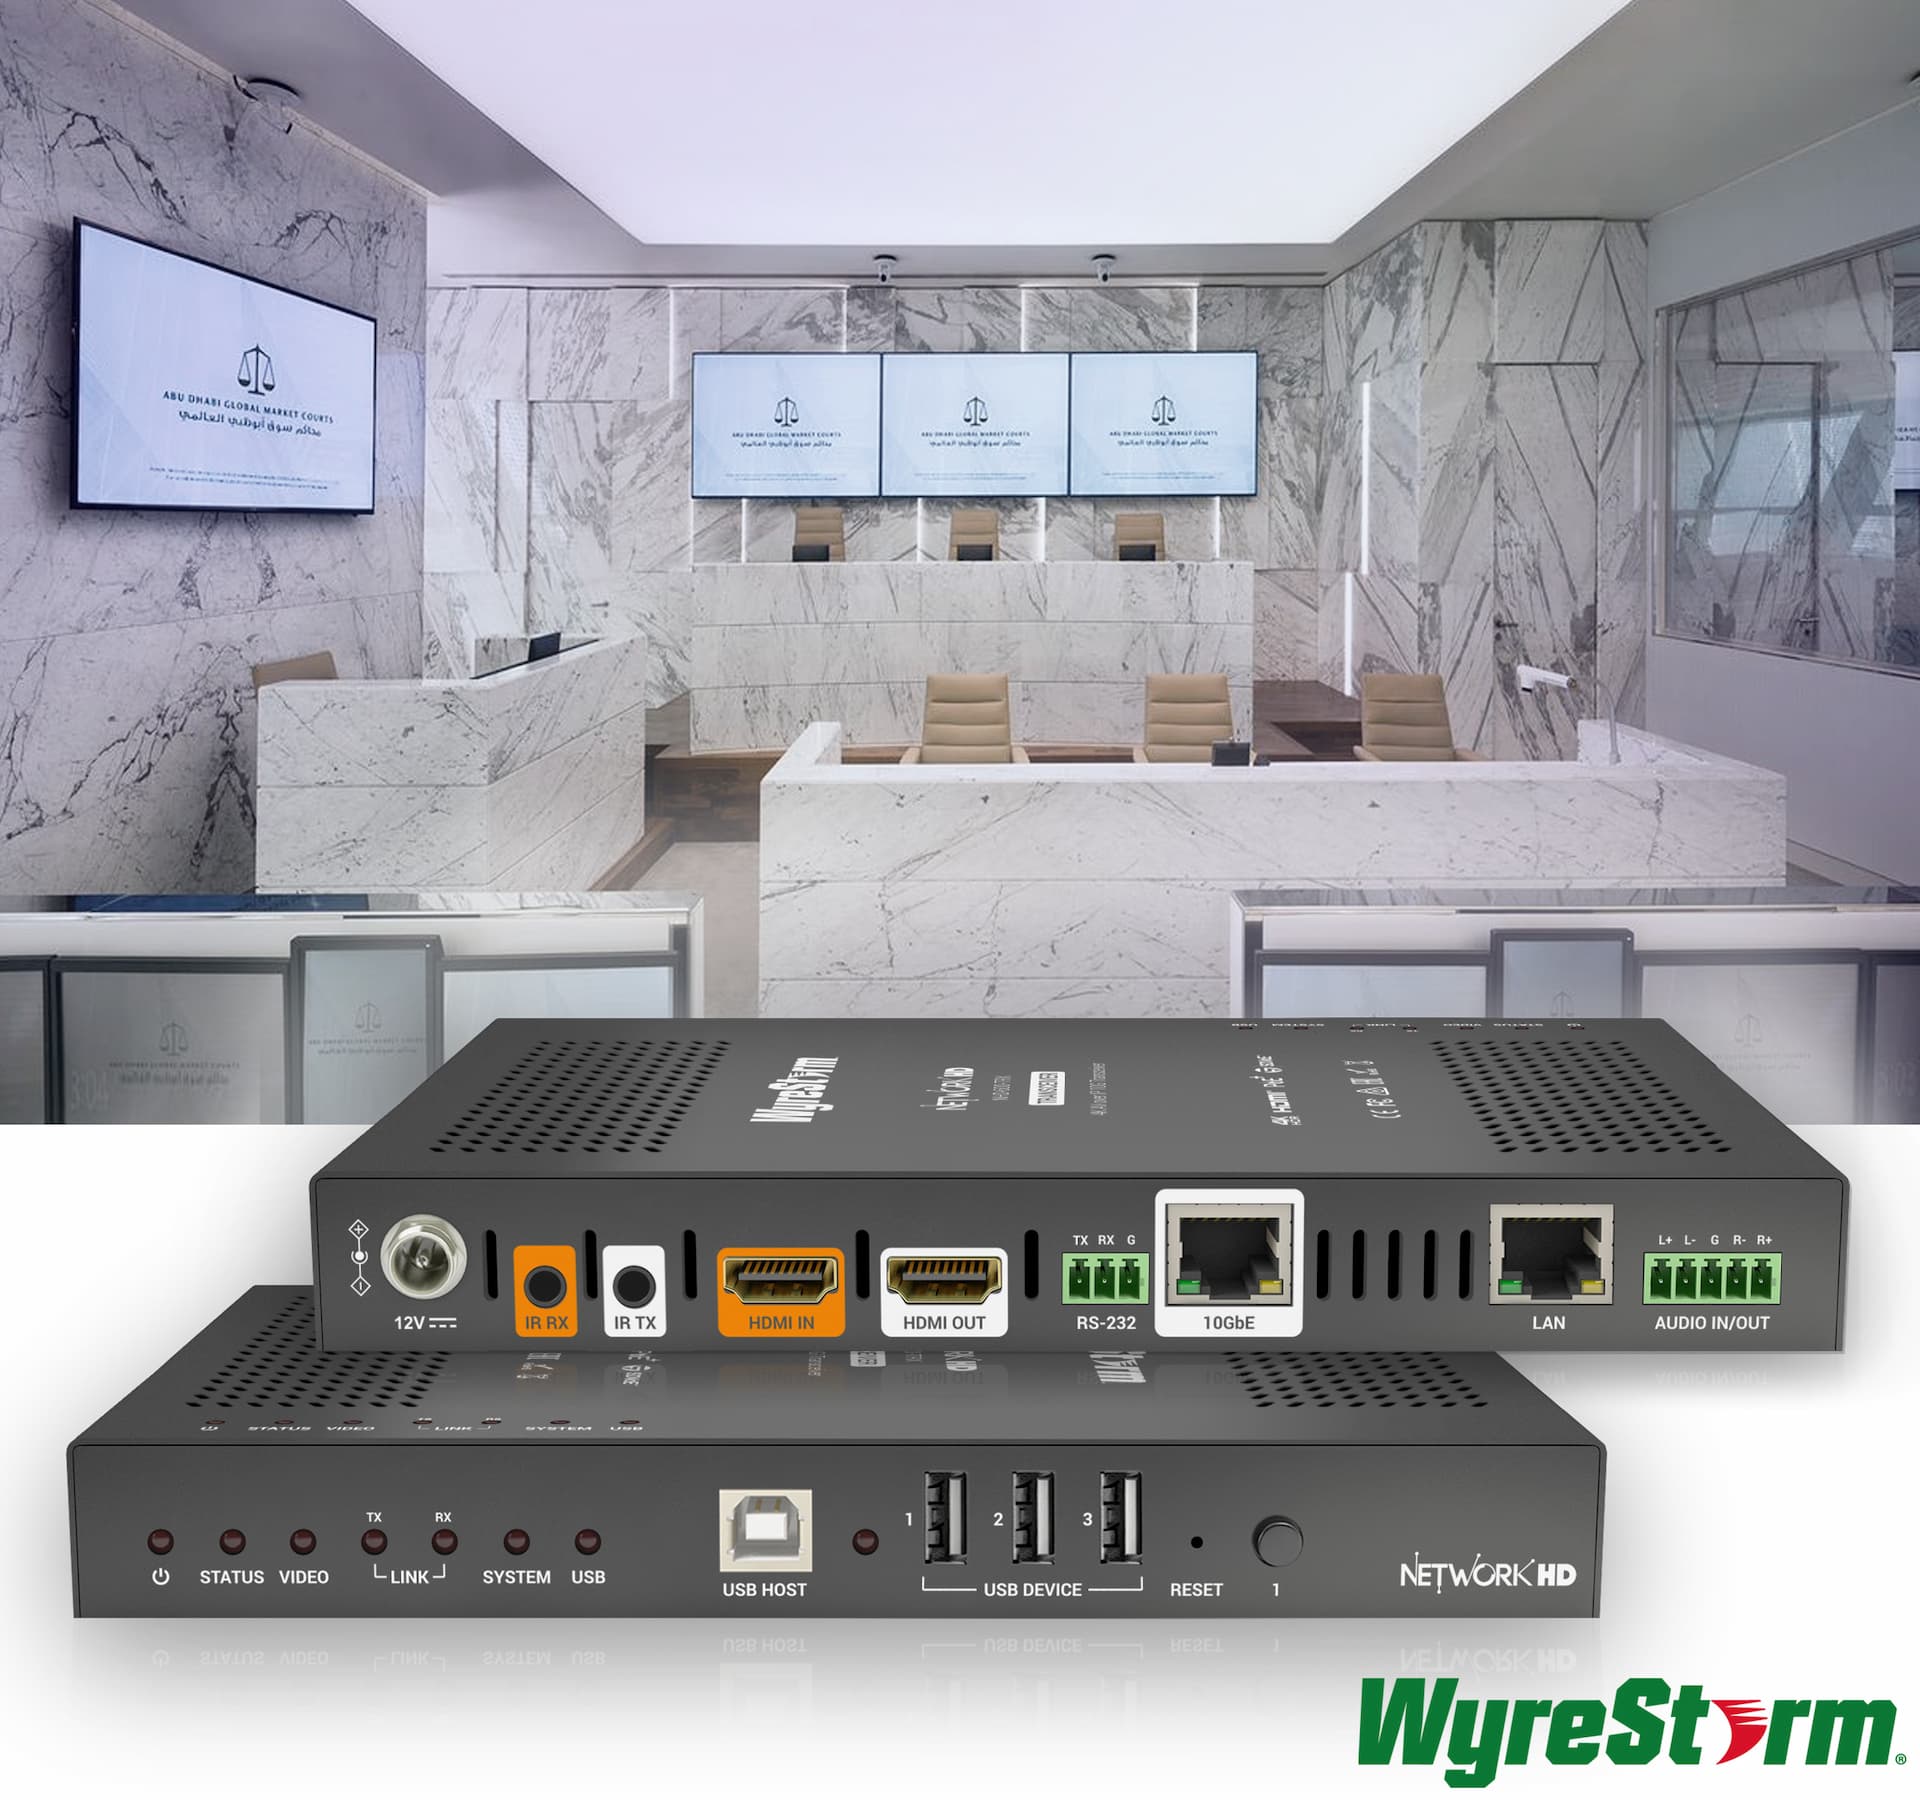 WyreStorm Launches New NetworkHD 600 Series 4K60 4:4:4 10GbE SDVOE Transceiver